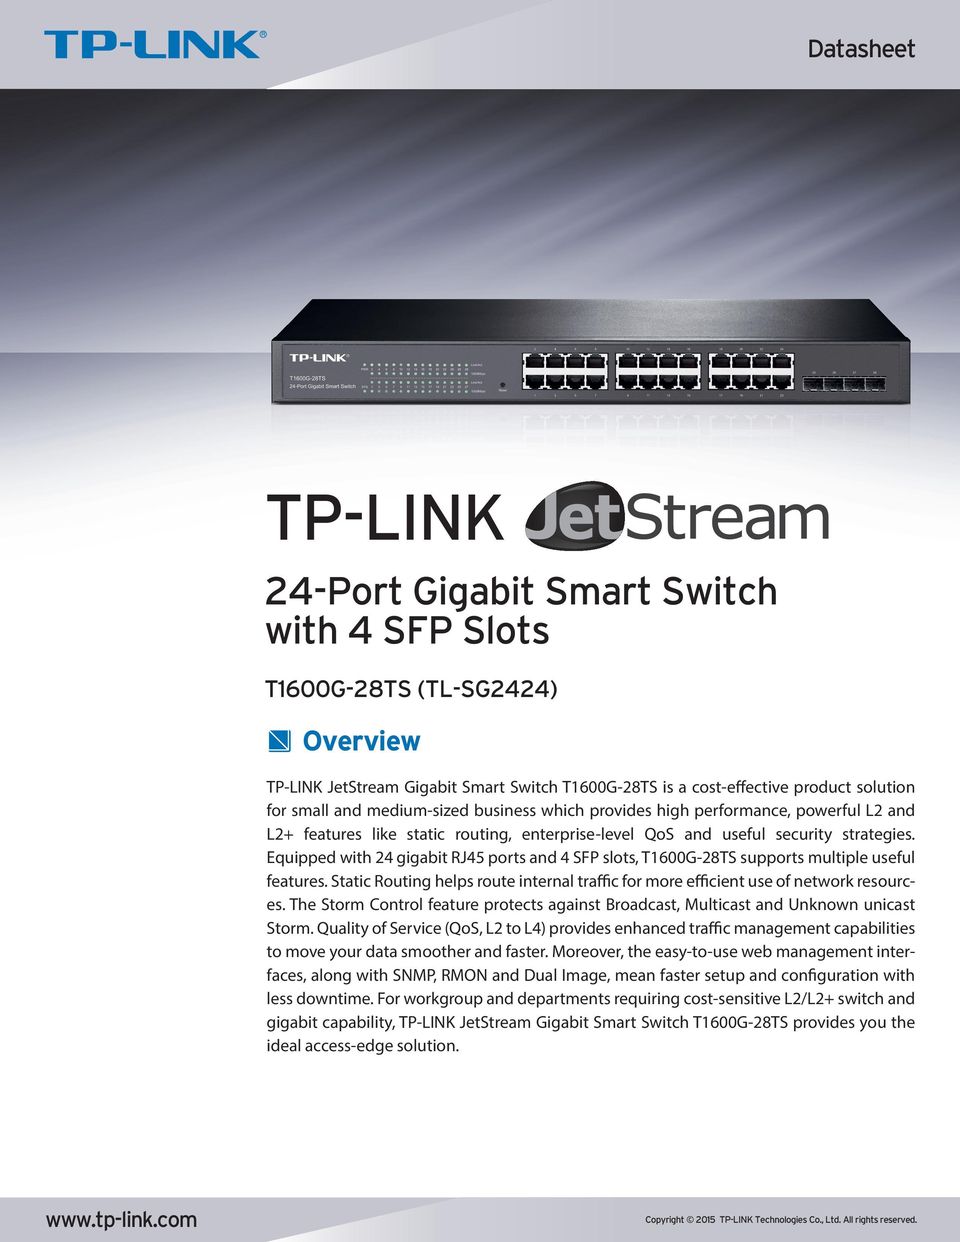 Equipped with 24 gigabit RJ45 ports and 4 SFP slots, T1600G-28TS supports multiple useful features. Static Routing helps route internal traffic for more efficient use of network resources.